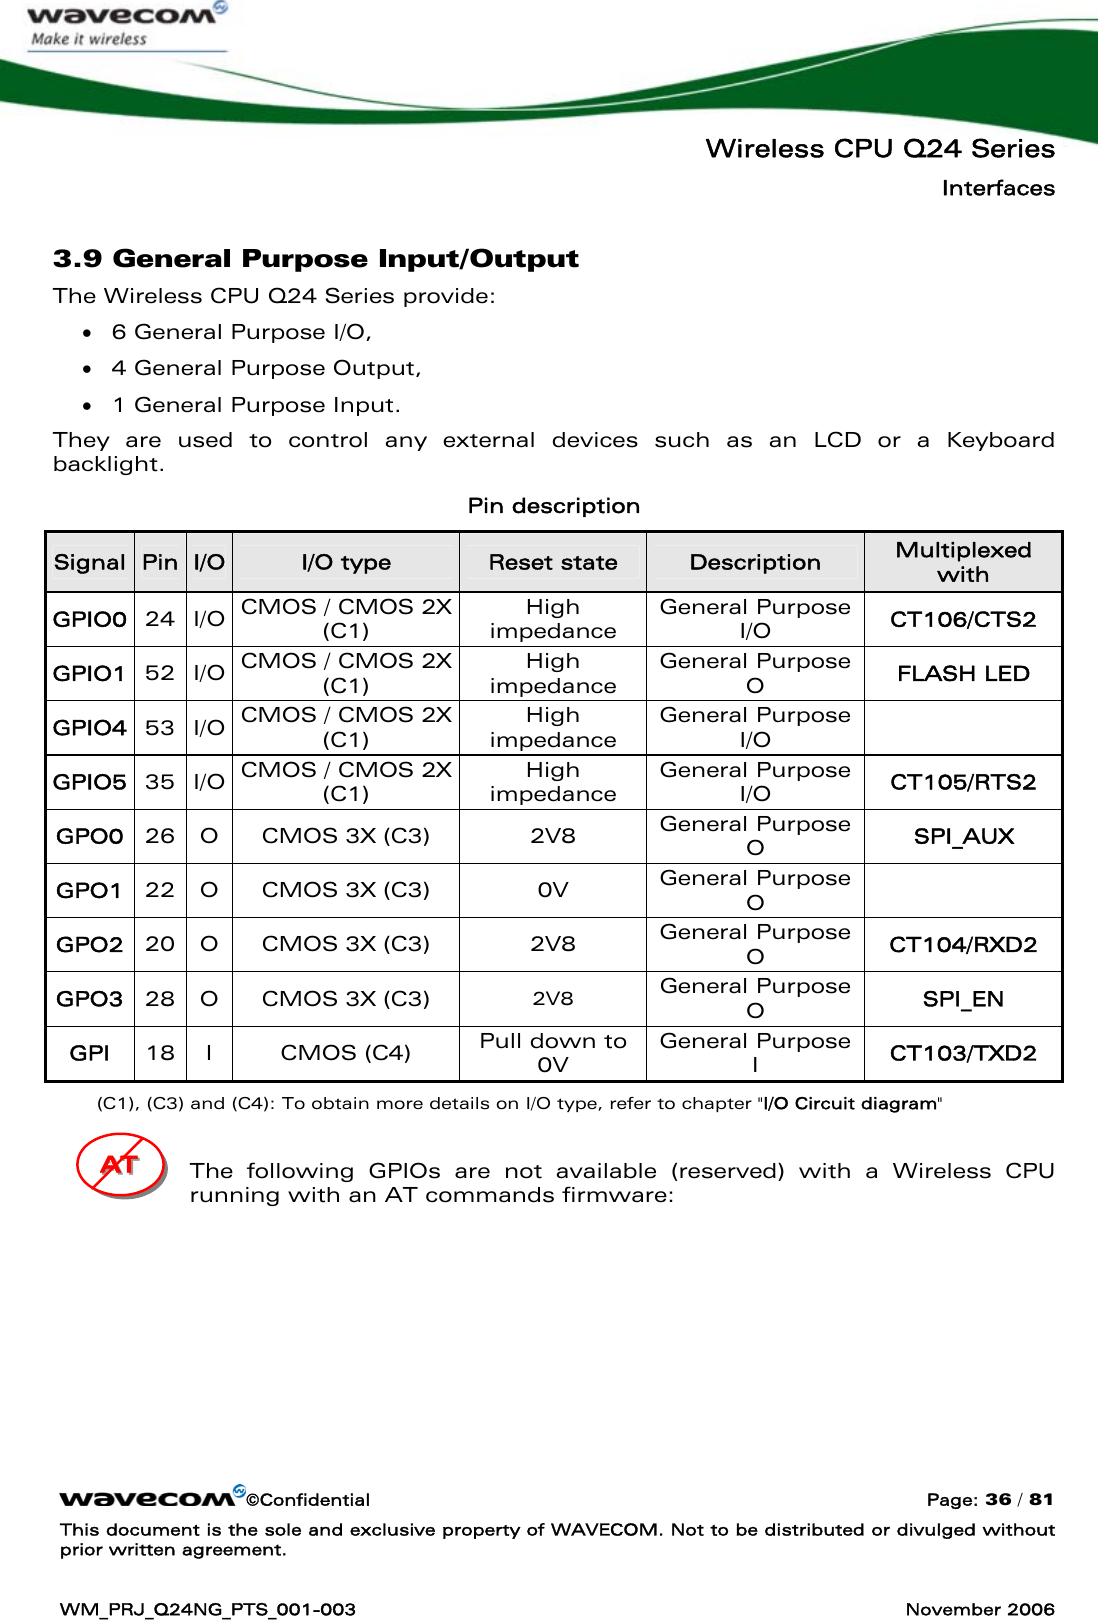   Wireless CPU Q24 Series Interfaces ©Confidential  Page: 36 / 81 This document is the sole and exclusive property of WAVECOM. Not to be distributed or divulged without prior written agreement.  WM_PRJ_Q24NG_PTS_001-003  November 2006  3.9 General Purpose Input/Output The Wireless CPU Q24 Series provide: • 6 General Purpose I/O, • 4 General Purpose Output, • 1 General Purpose Input. They are used to control any external devices such as an LCD or a Keyboard backlight.  Pin description Signal  Pin  I/O  I/O type  Reset state  Description  Multiplexed with GPIO0  24 I/O CMOS / CMOS 2X (C1) High impedance General Purpose I/O  CT106/CTS2 GPIO1  52 I/O CMOS / CMOS 2X (C1) High impedance General Purpose O  FLASH LED GPIO4  53 I/O CMOS / CMOS 2X (C1) High impedance General Purpose I/O   GPIO5  35 I/O CMOS / CMOS 2X (C1) High impedance General Purpose I/O  CT105/RTS2 GPO0  26  O  CMOS 3X (C3)  2V8  General Purpose O  SPI_AUX GPO1  22  O  CMOS 3X (C3)  0V  General Purpose O   GPO2  20  O  CMOS 3X (C3)  2V8  General Purpose O  CT104/RXD2 GPO3  28  O  CMOS 3X (C3)  2V8 General Purpose O  SPI_EN GPI  18 I  CMOS (C4)  Pull down to 0V General Purpose I  CT103/TXD2 (C1), (C3) and (C4): To obtain more details on I/O type, refer to chapter &quot;I/O Circuit diagram&quot;  The following GPIOs are not available (reserved) with a Wireless CPU running with an AT commands firmware:  AAATTT   